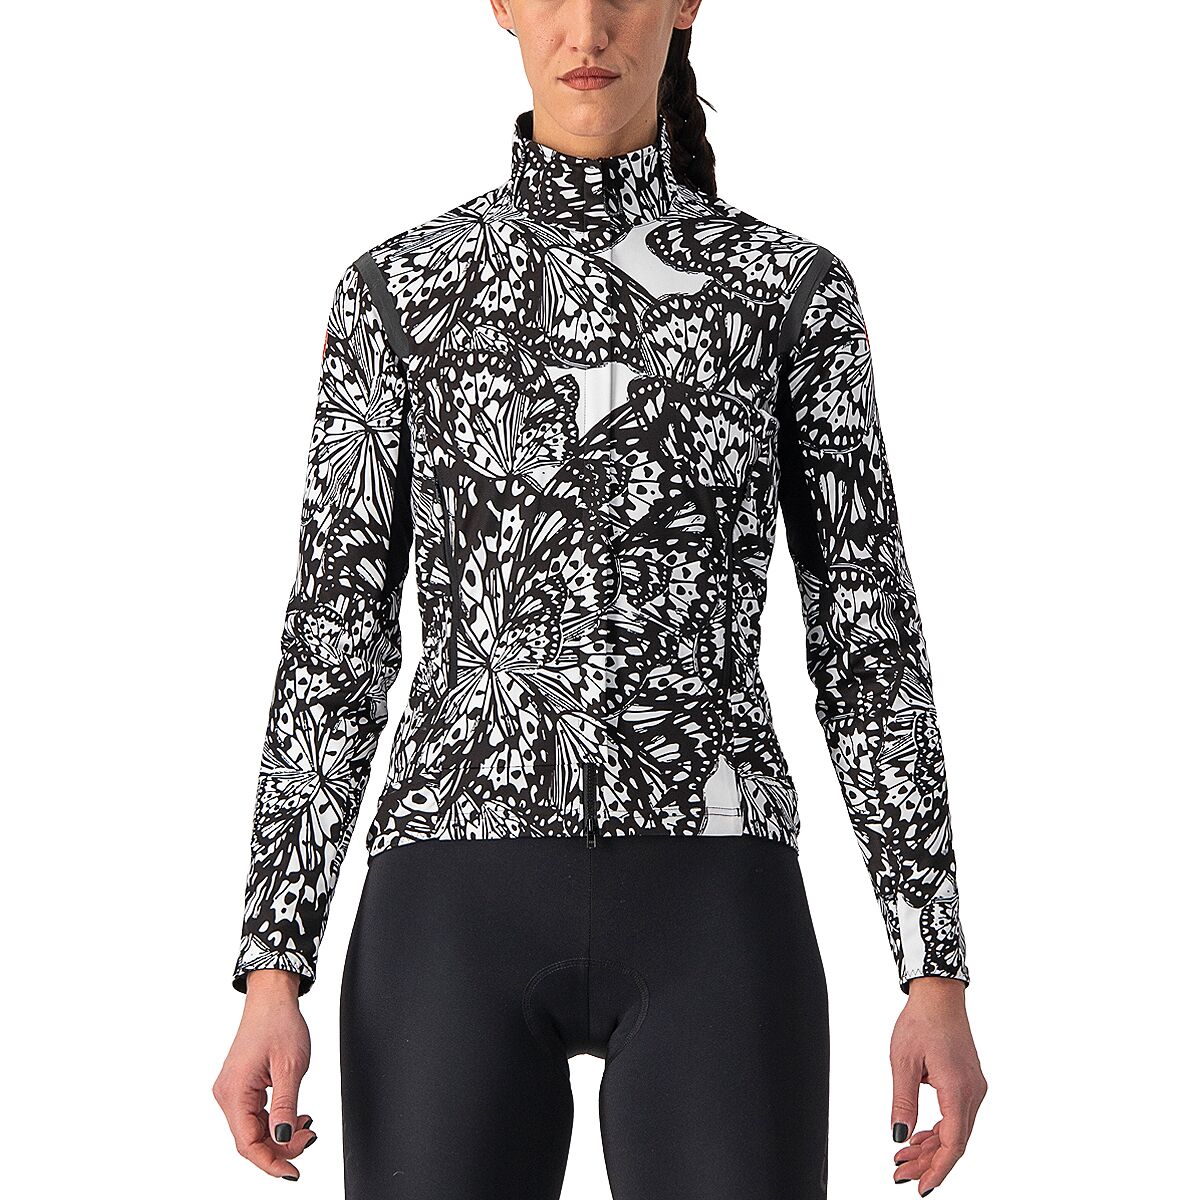 Castelli Unlimited Perfetto RoS Jacket - Women's